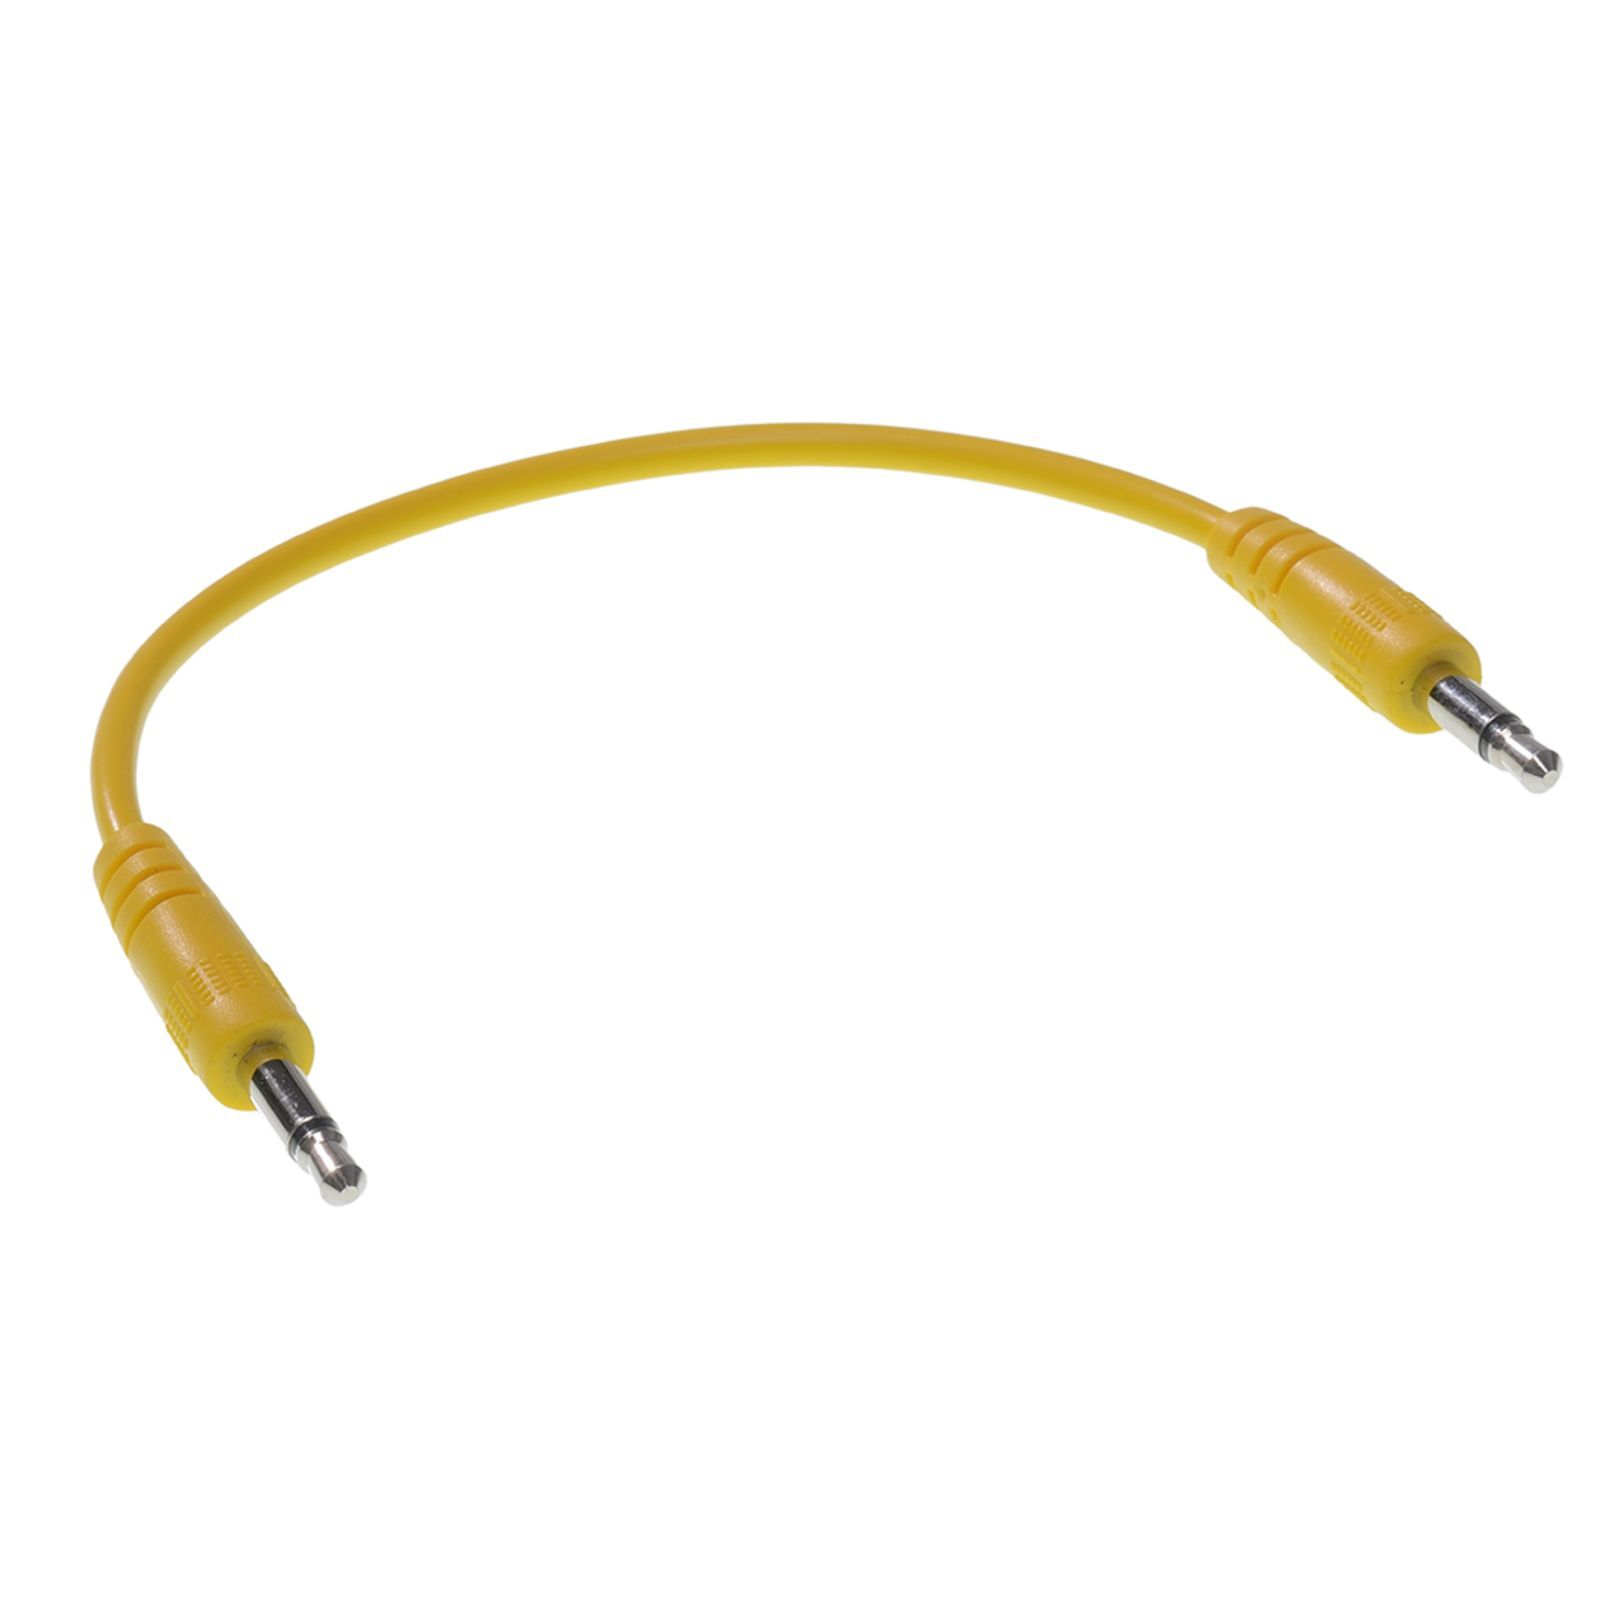 doepfer-a-100-c15-patch-cable-15-cm-yellow_1_SYN0003925-000.jpg